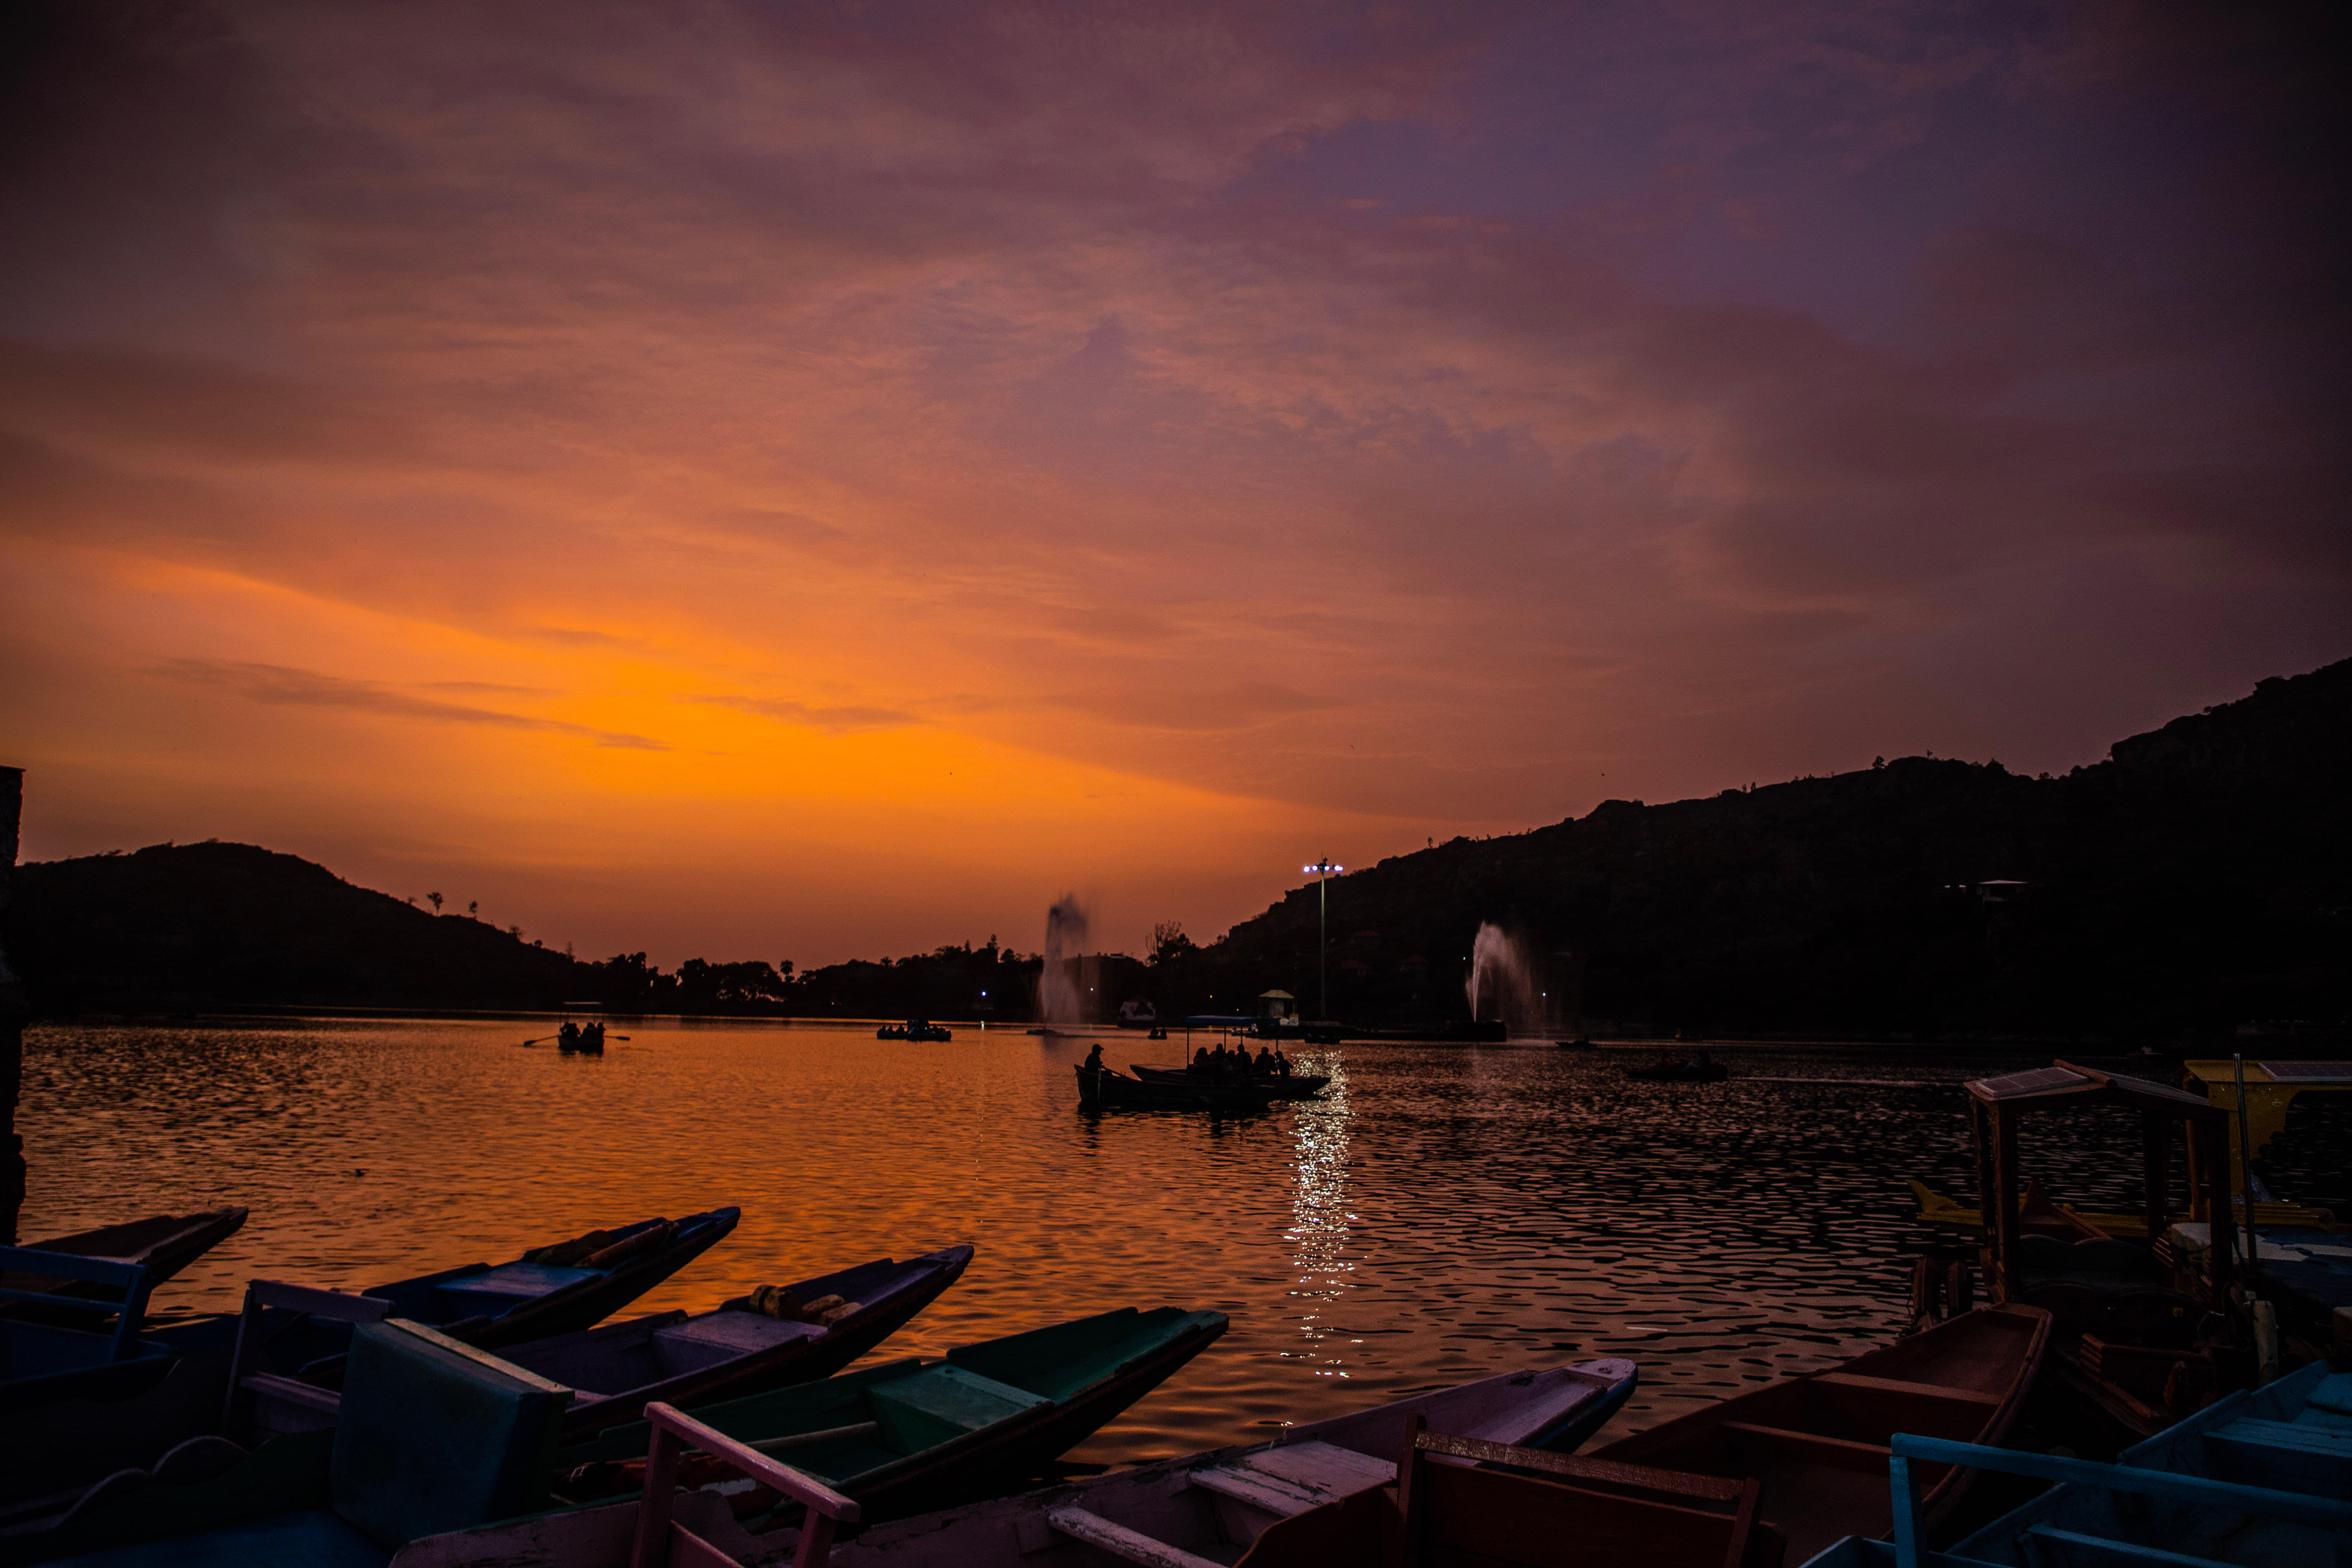 Mount Abu Packages from Kolkata | Get Upto 50% Off